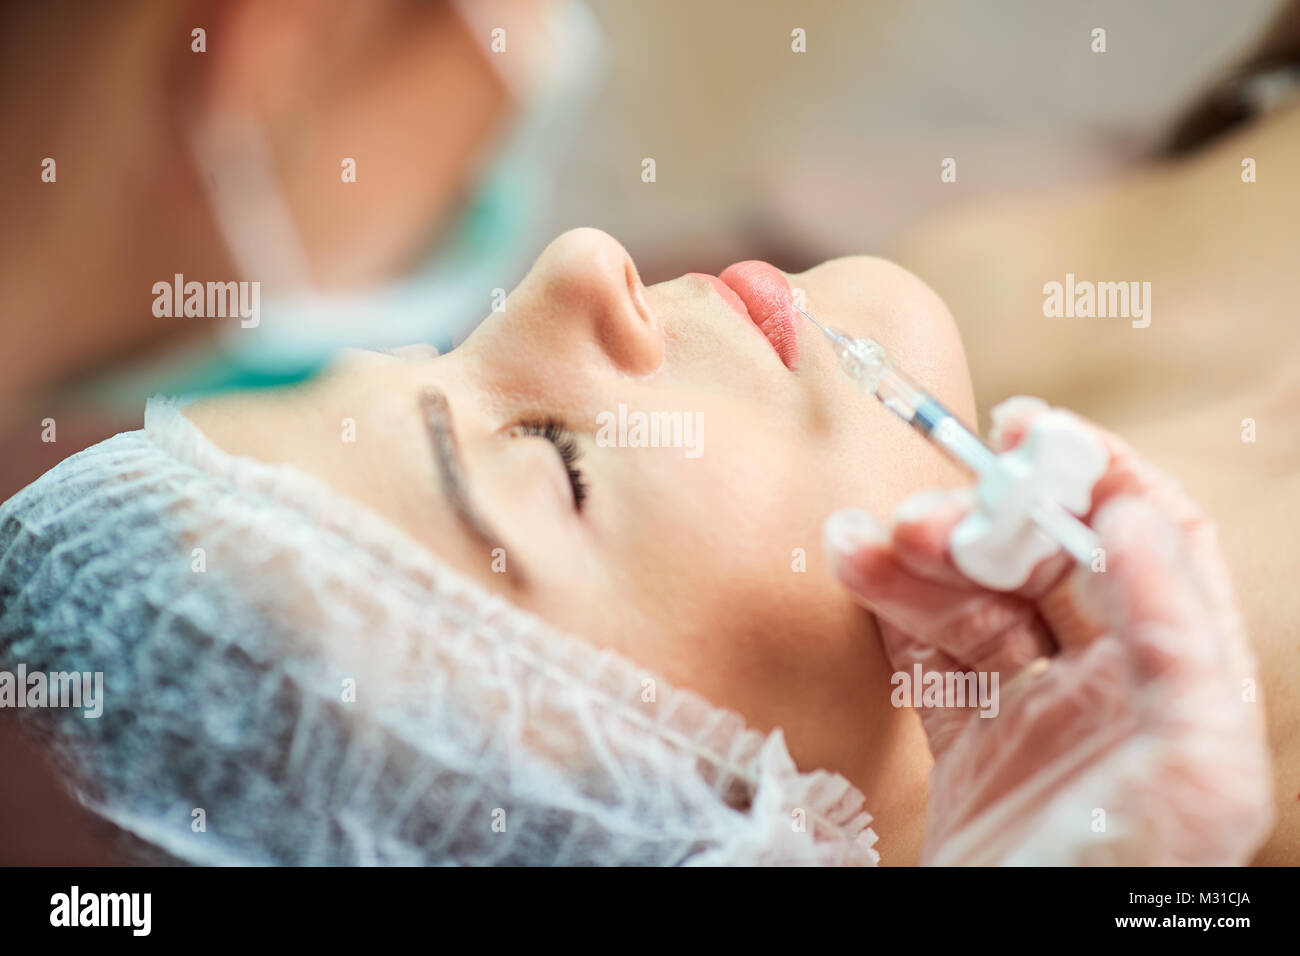 Cosmetic injection in the spa salon.  Stock Photo